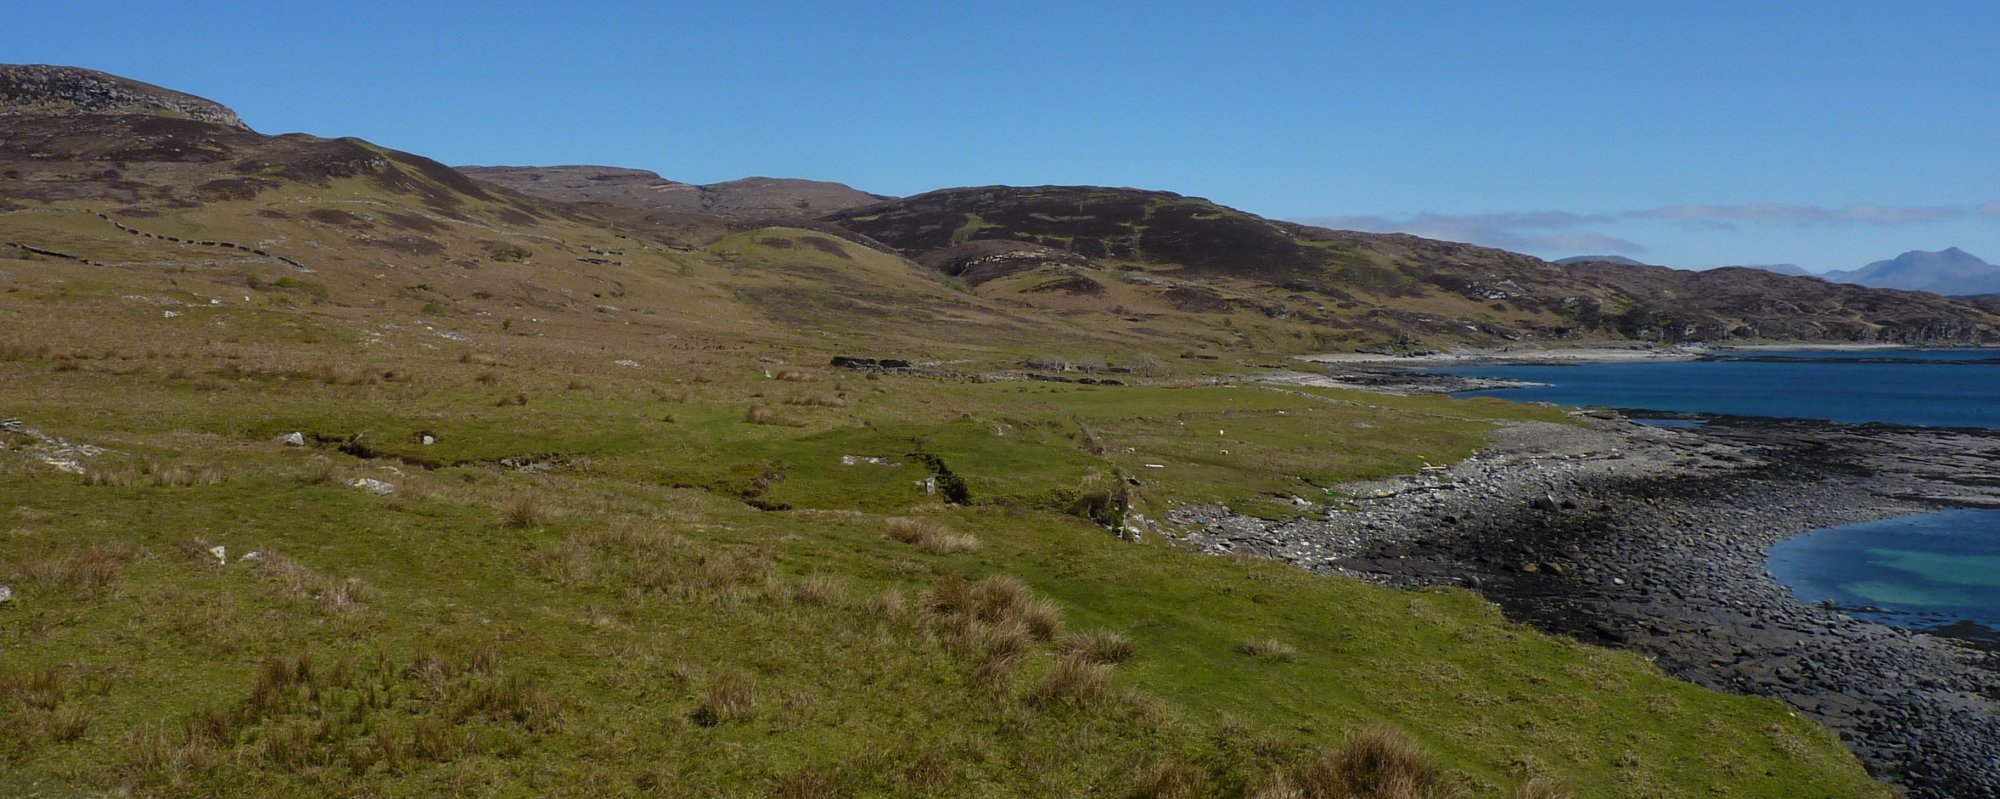 Arriving in Boreraig, lovely green and fertile pastures, allocated to sheep at the expense of several crofting families